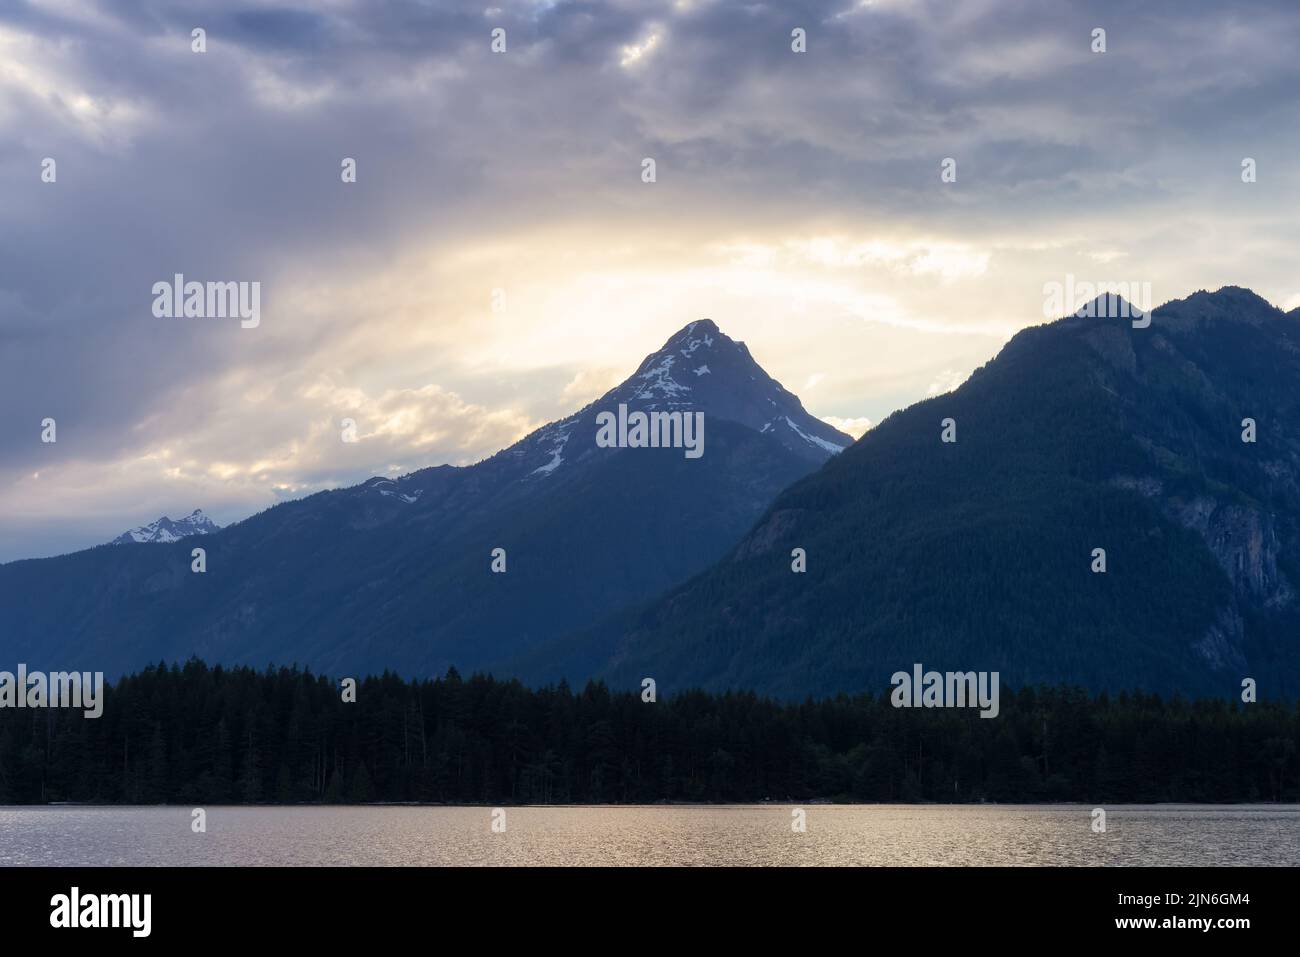 Lake, trees and mountains in Canadian Landscape. Stock Photo